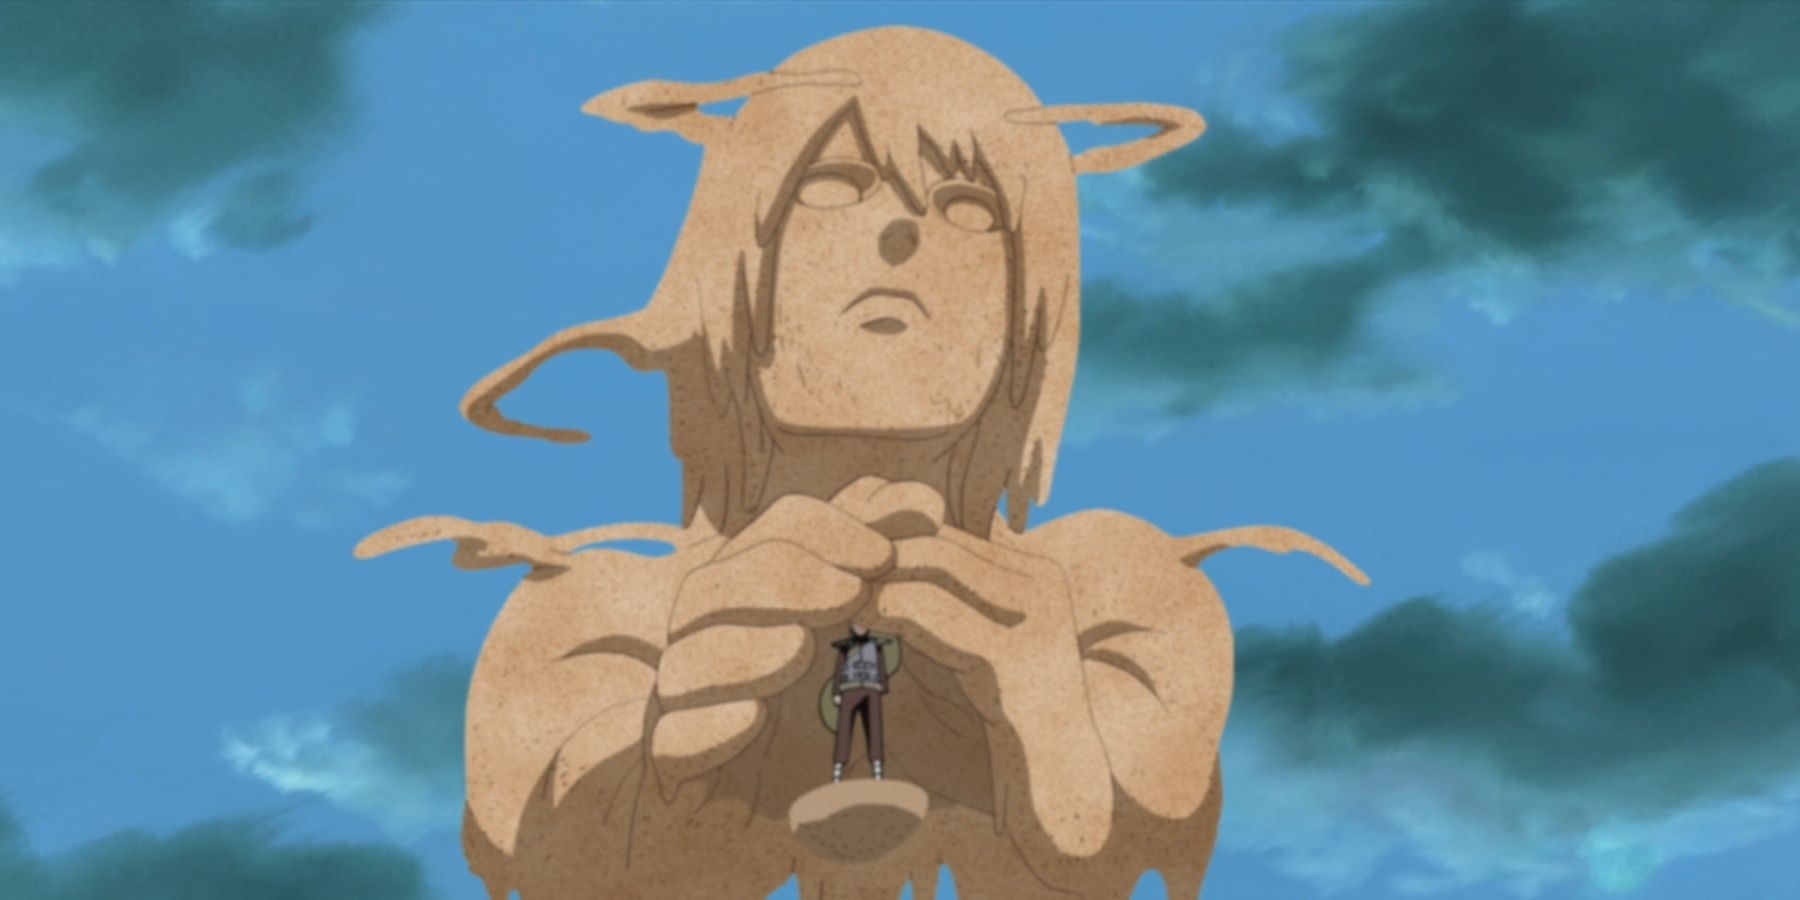 Gaara being protected by shield of sand